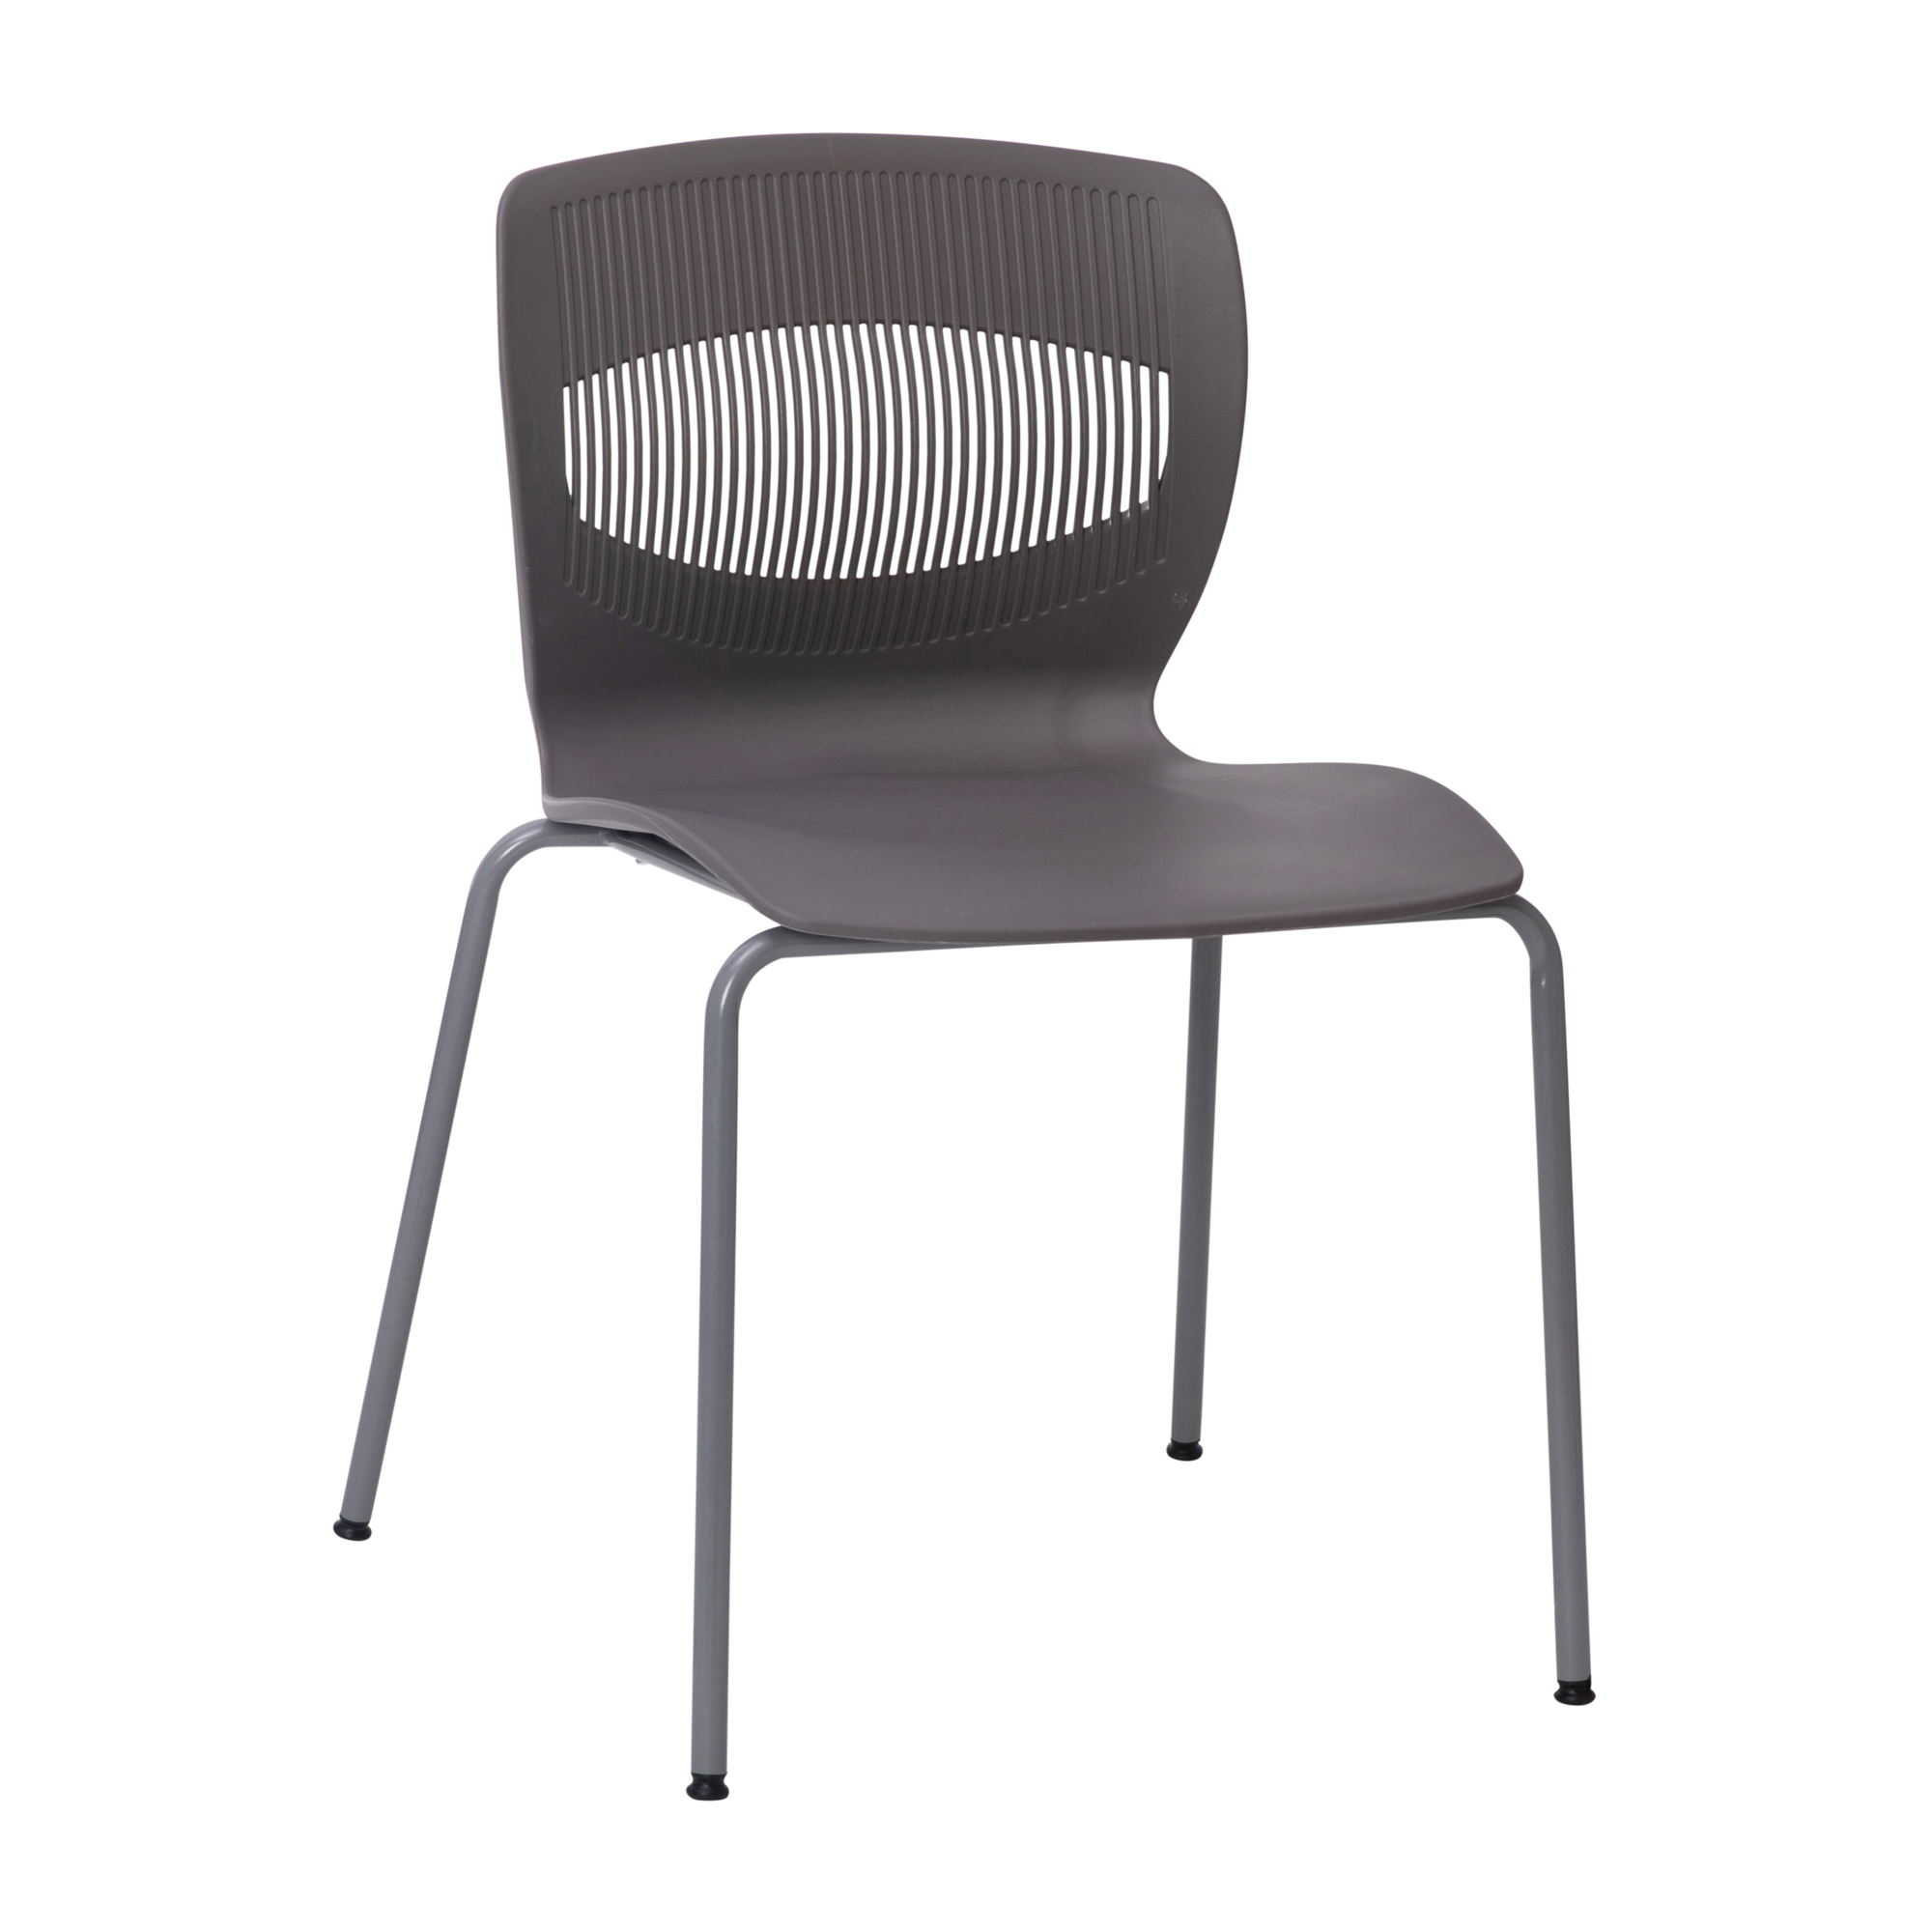 Flash Furniture, Gray Plastic Stack Chair with Lumbar Support, Primary Color Gray, Included (qty.) 1, Model RUTNC618GY